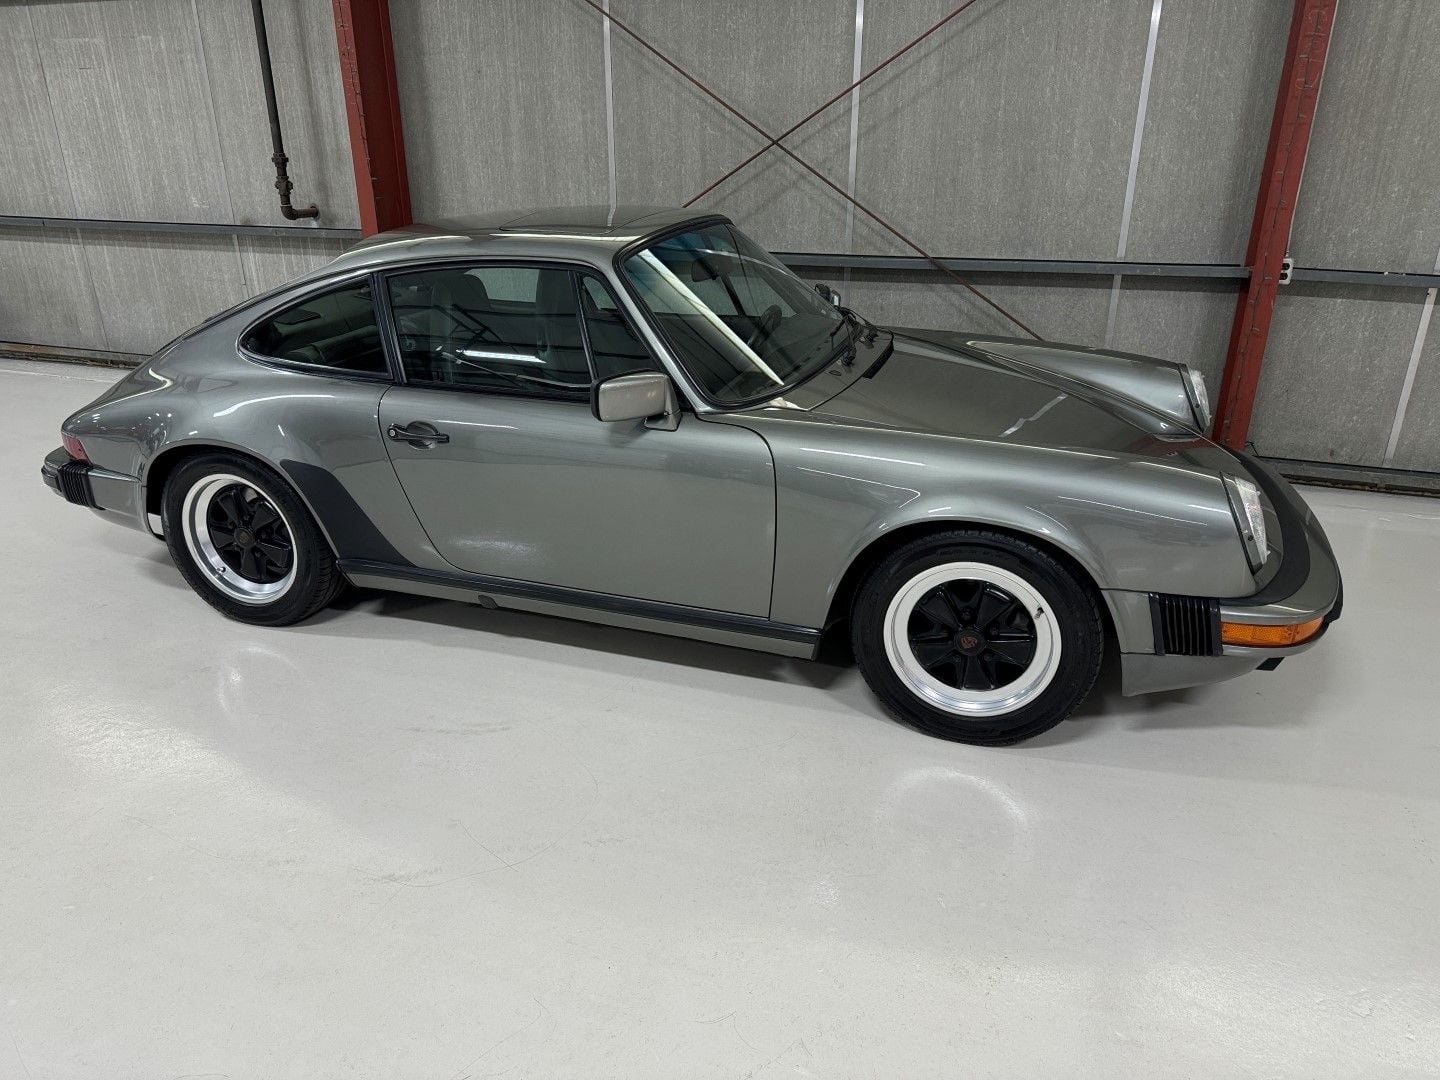 1988 Porsche 911 - 1988 Porsche 911 Granite Green G50 Coupe - Used - VIN WP0AB0912JS120138 - 70,576 Miles - 6 cyl - 2WD - Manual - Coupe - Gray - Twinsburg, OH 44087, United States